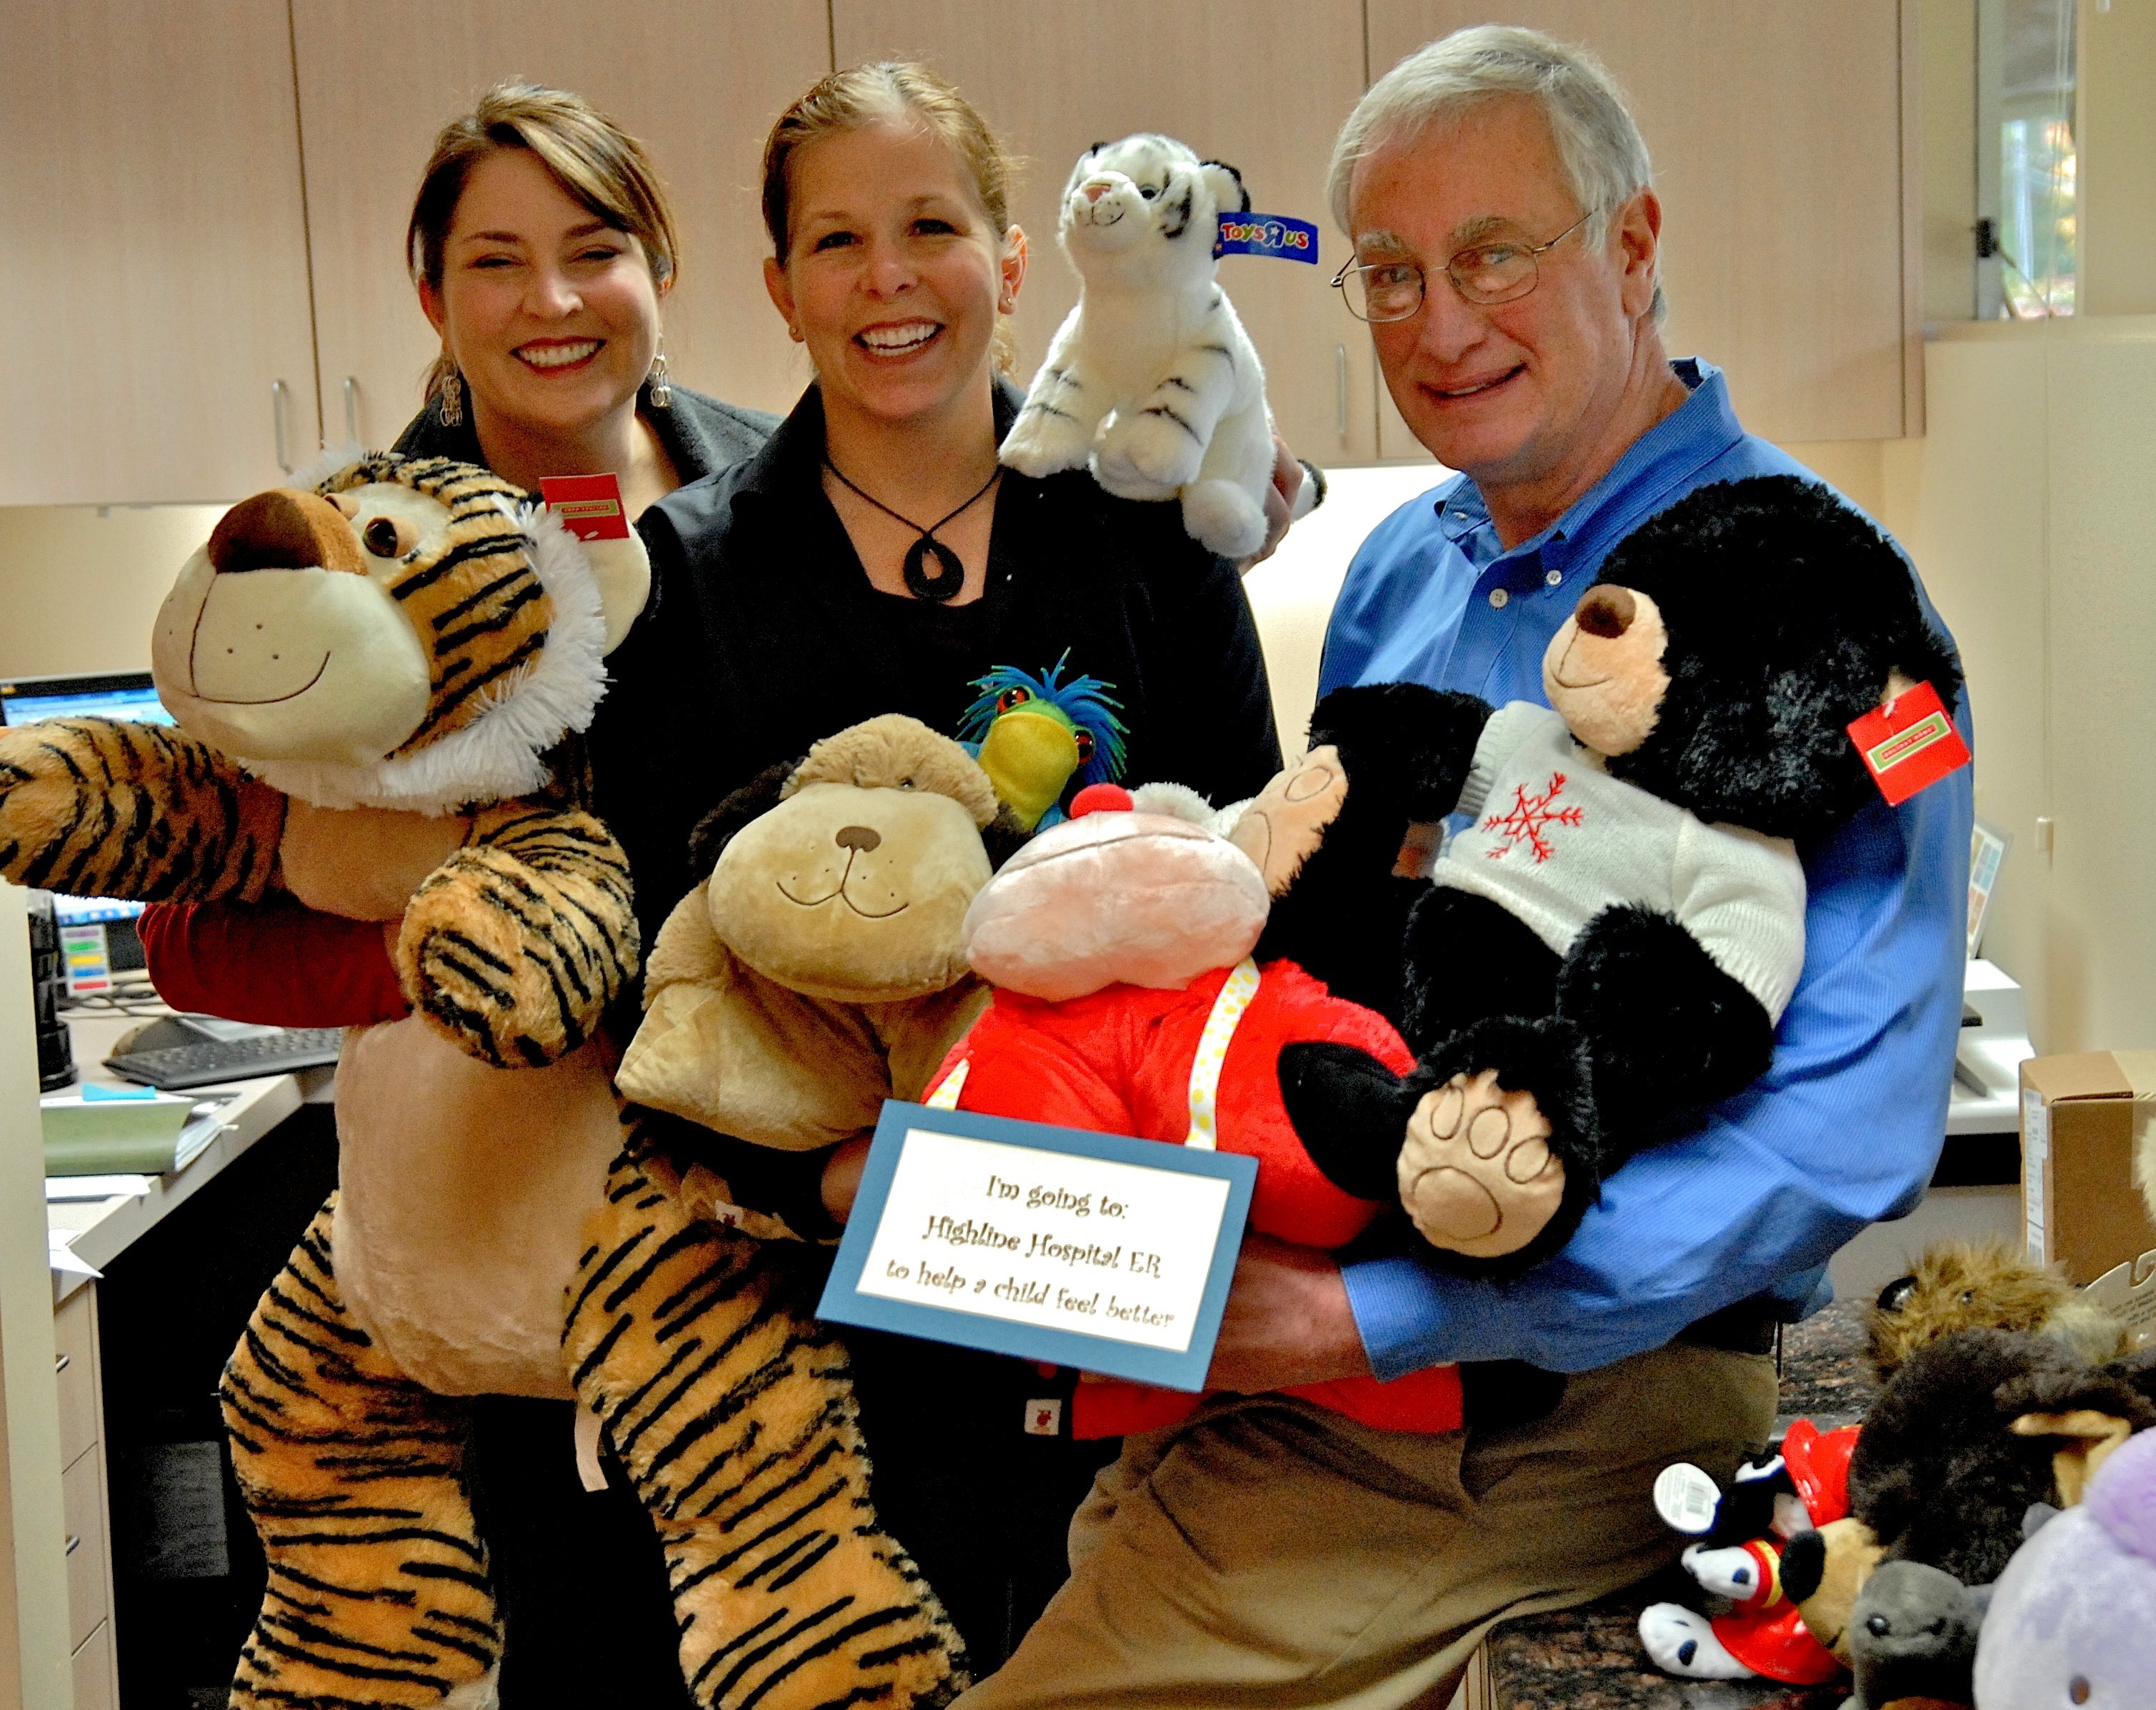 Burien dentist Dr. Jim Coleman & staff invite public to stop into their  office with donated stuffed animal | Westside Seattle